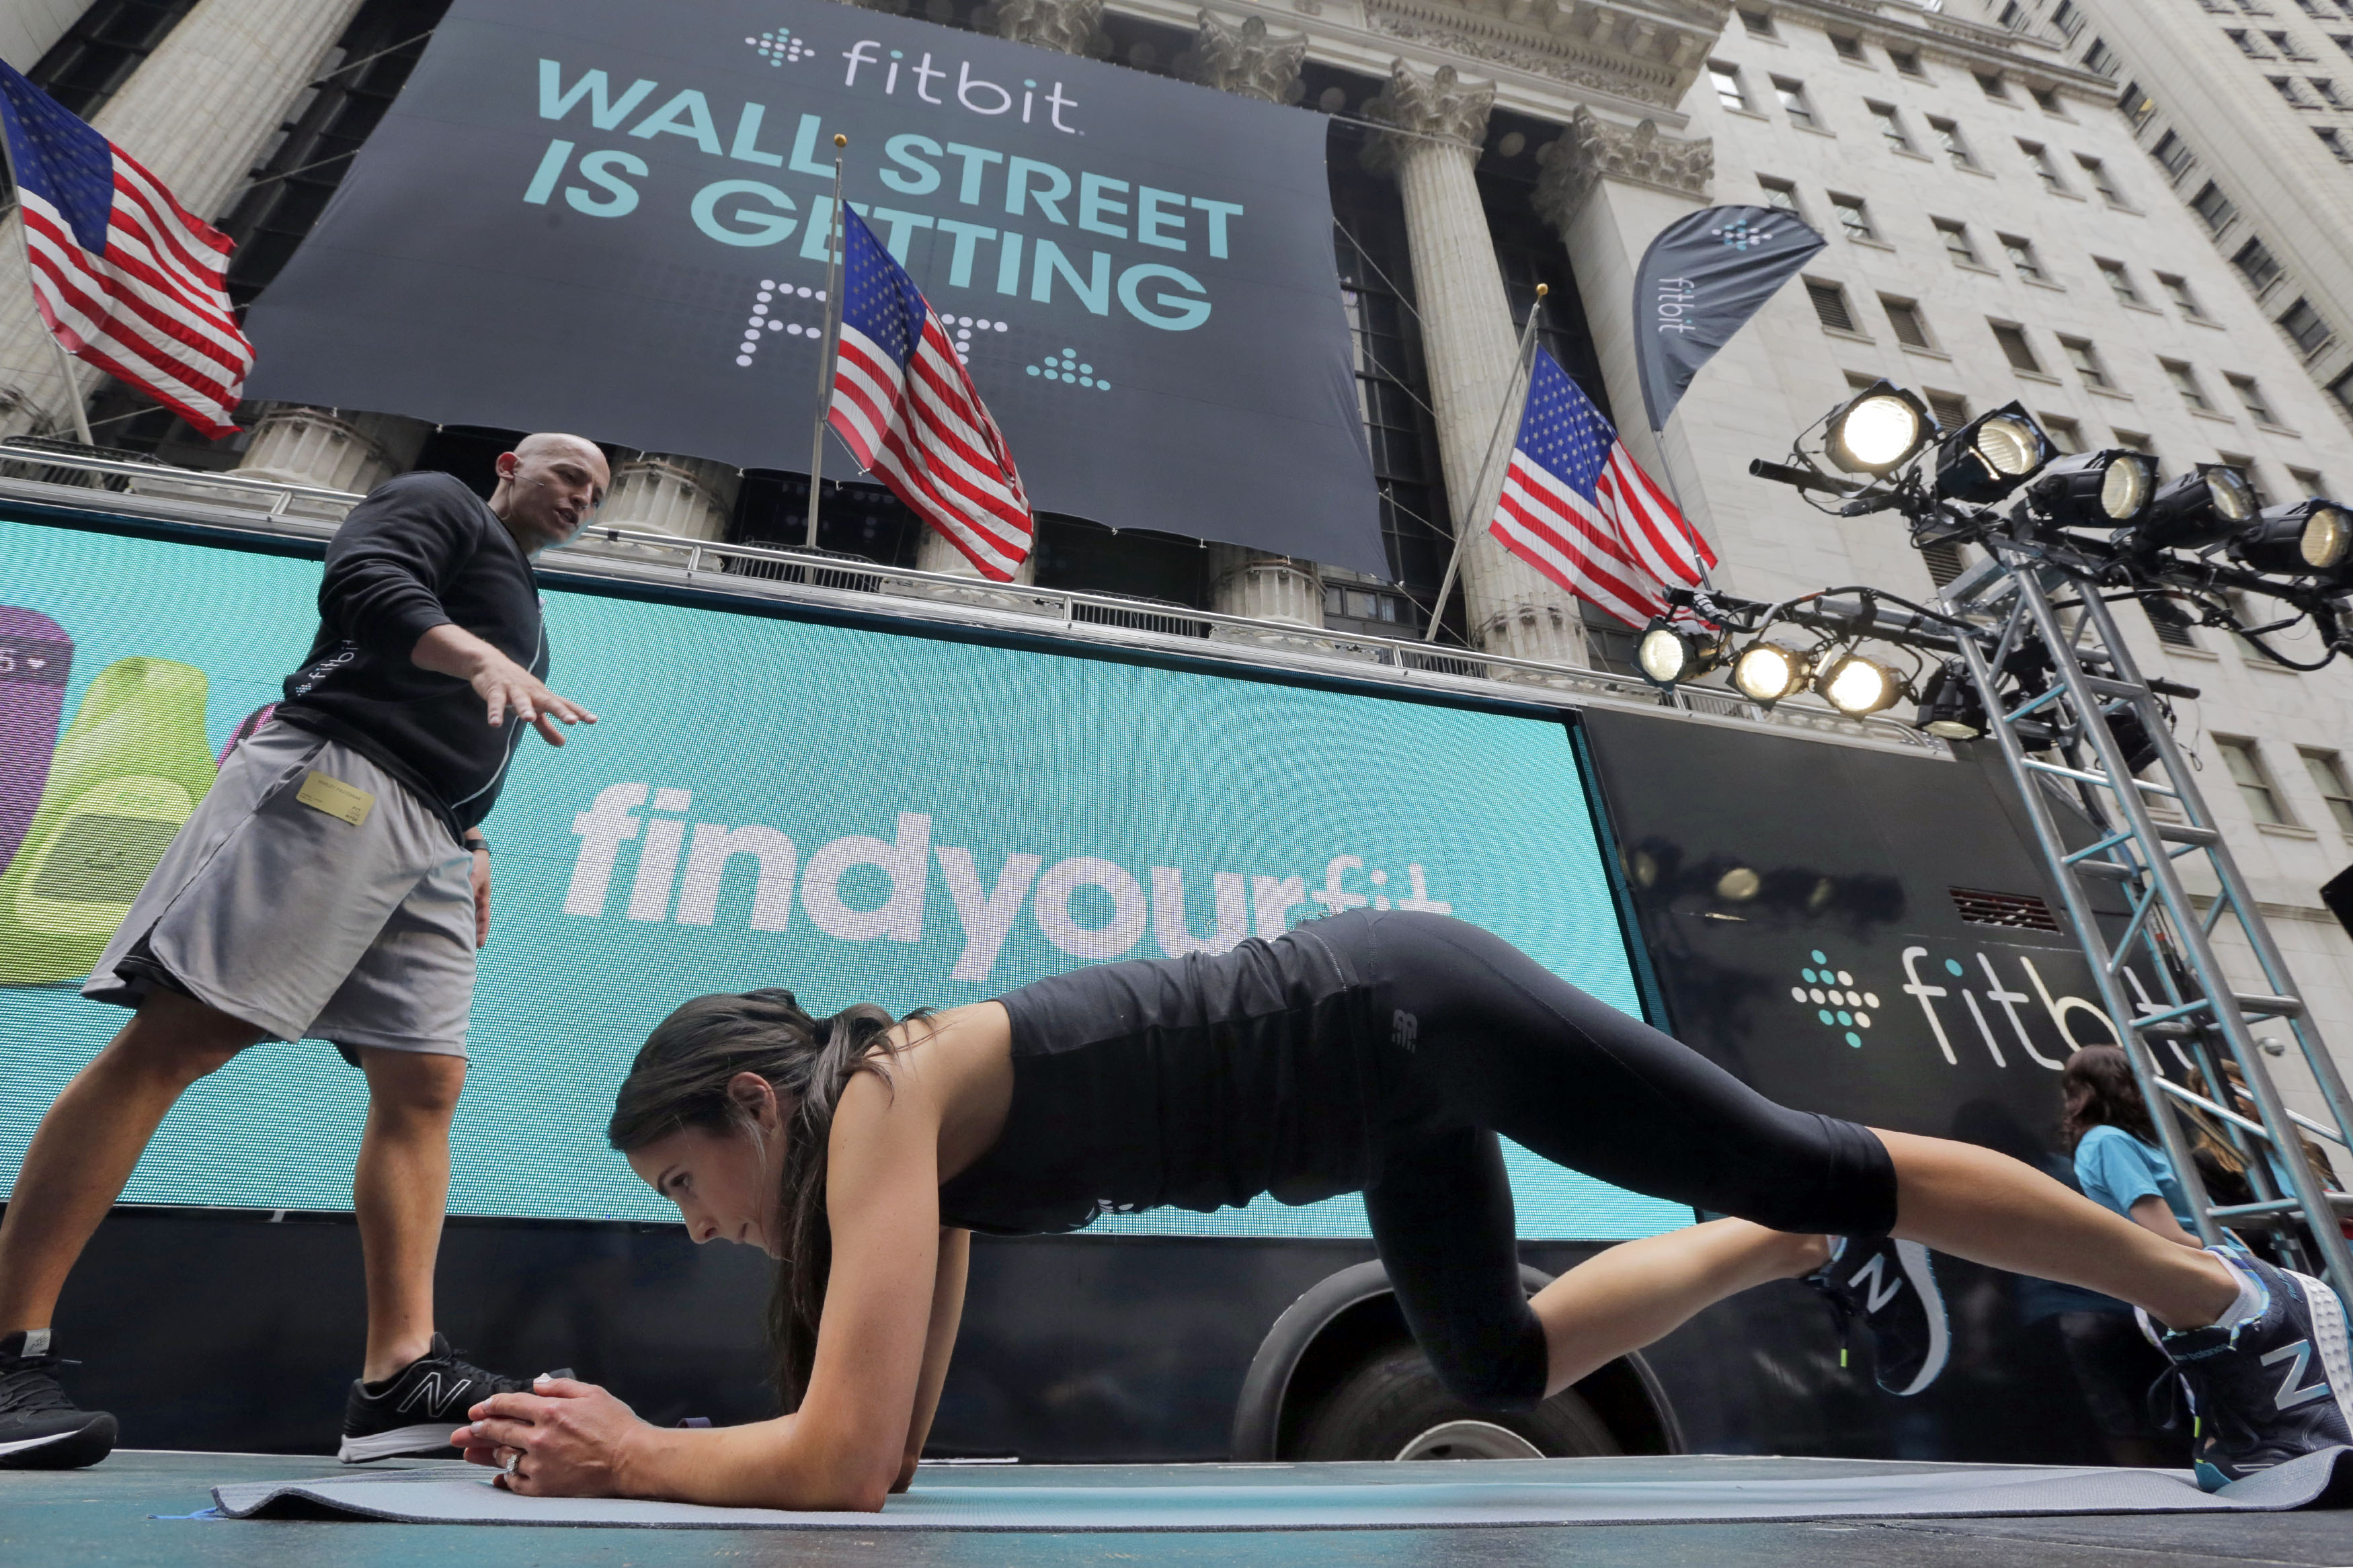 From left: Fitness expert Harley Pasternak and actress Jordana Brewster lead a work out on behalf of Fitbit, in front of the New York Stock Exchange, June 18, 2015. (Richard Drew—AP)